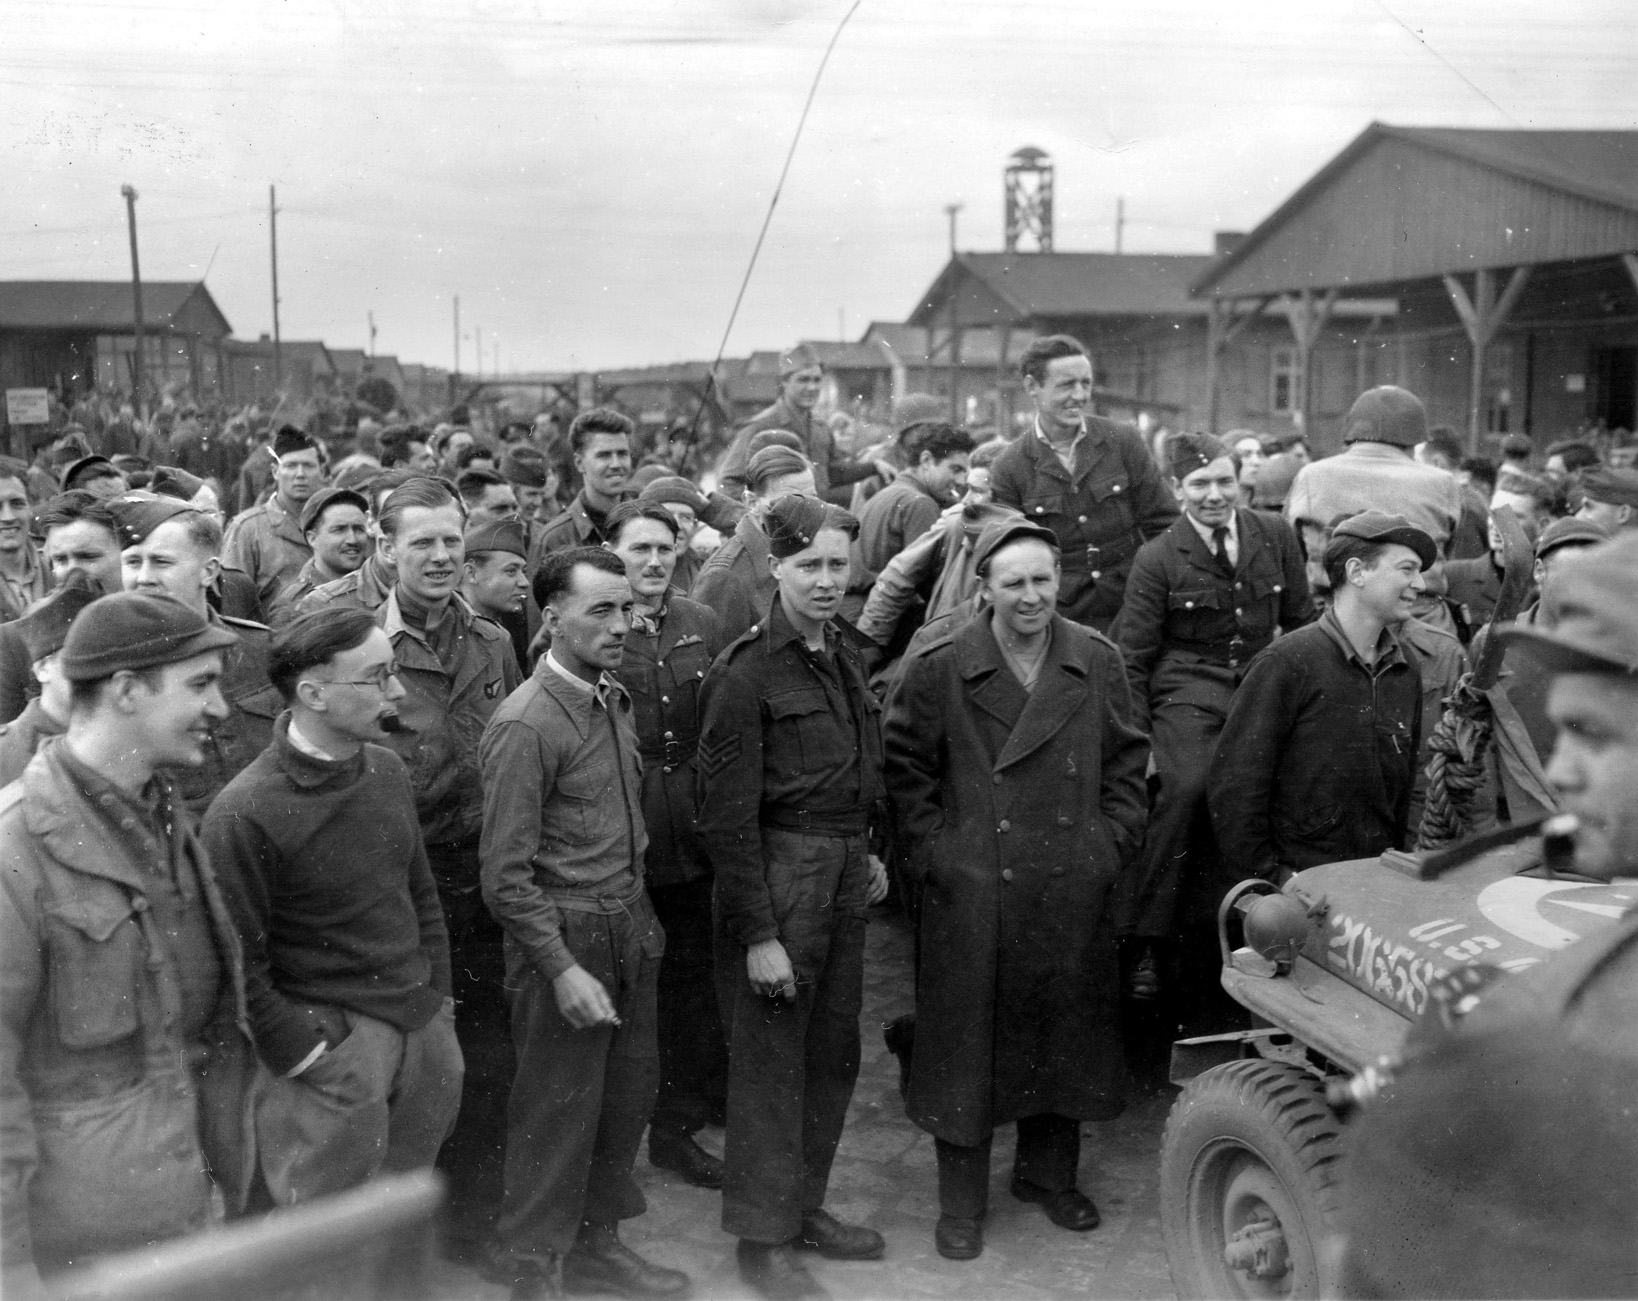 Liberated from a German prison camp in the spring of 1945, American and British soldiers relish their first moments of freedom in months. Medical treatment, ample food, and the long trek home awaited them after a long period of privation.